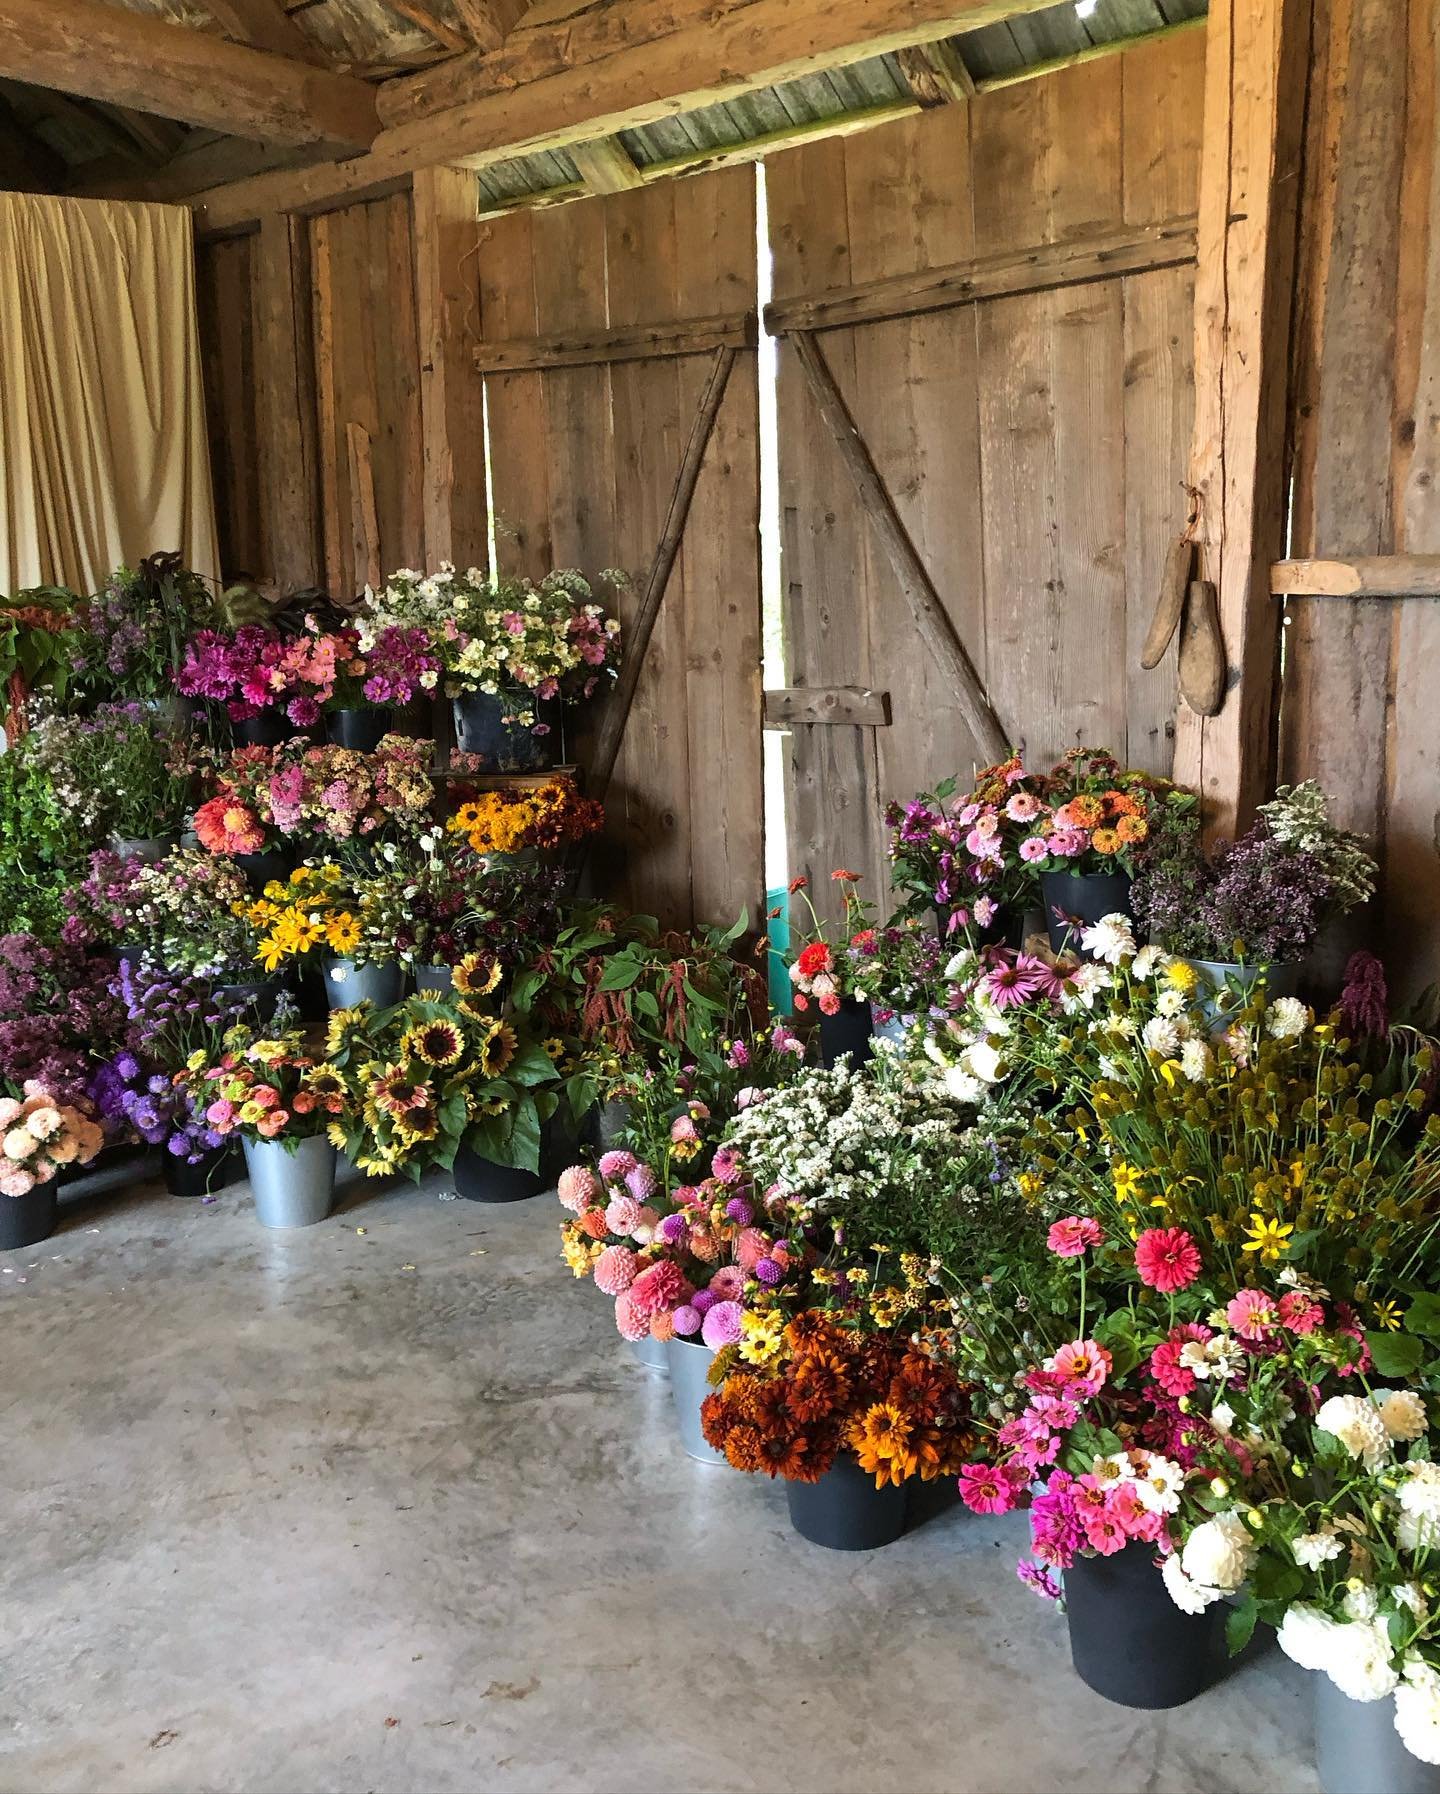 This time, no polished pictures or snazzy marketing words about why you should come to the Floral Artistry Retreat in Estonia. 

We are all about keeping things real. Pretty, but real. Besides, I have a 2:1 class on Friday so my brain is pre-occupied